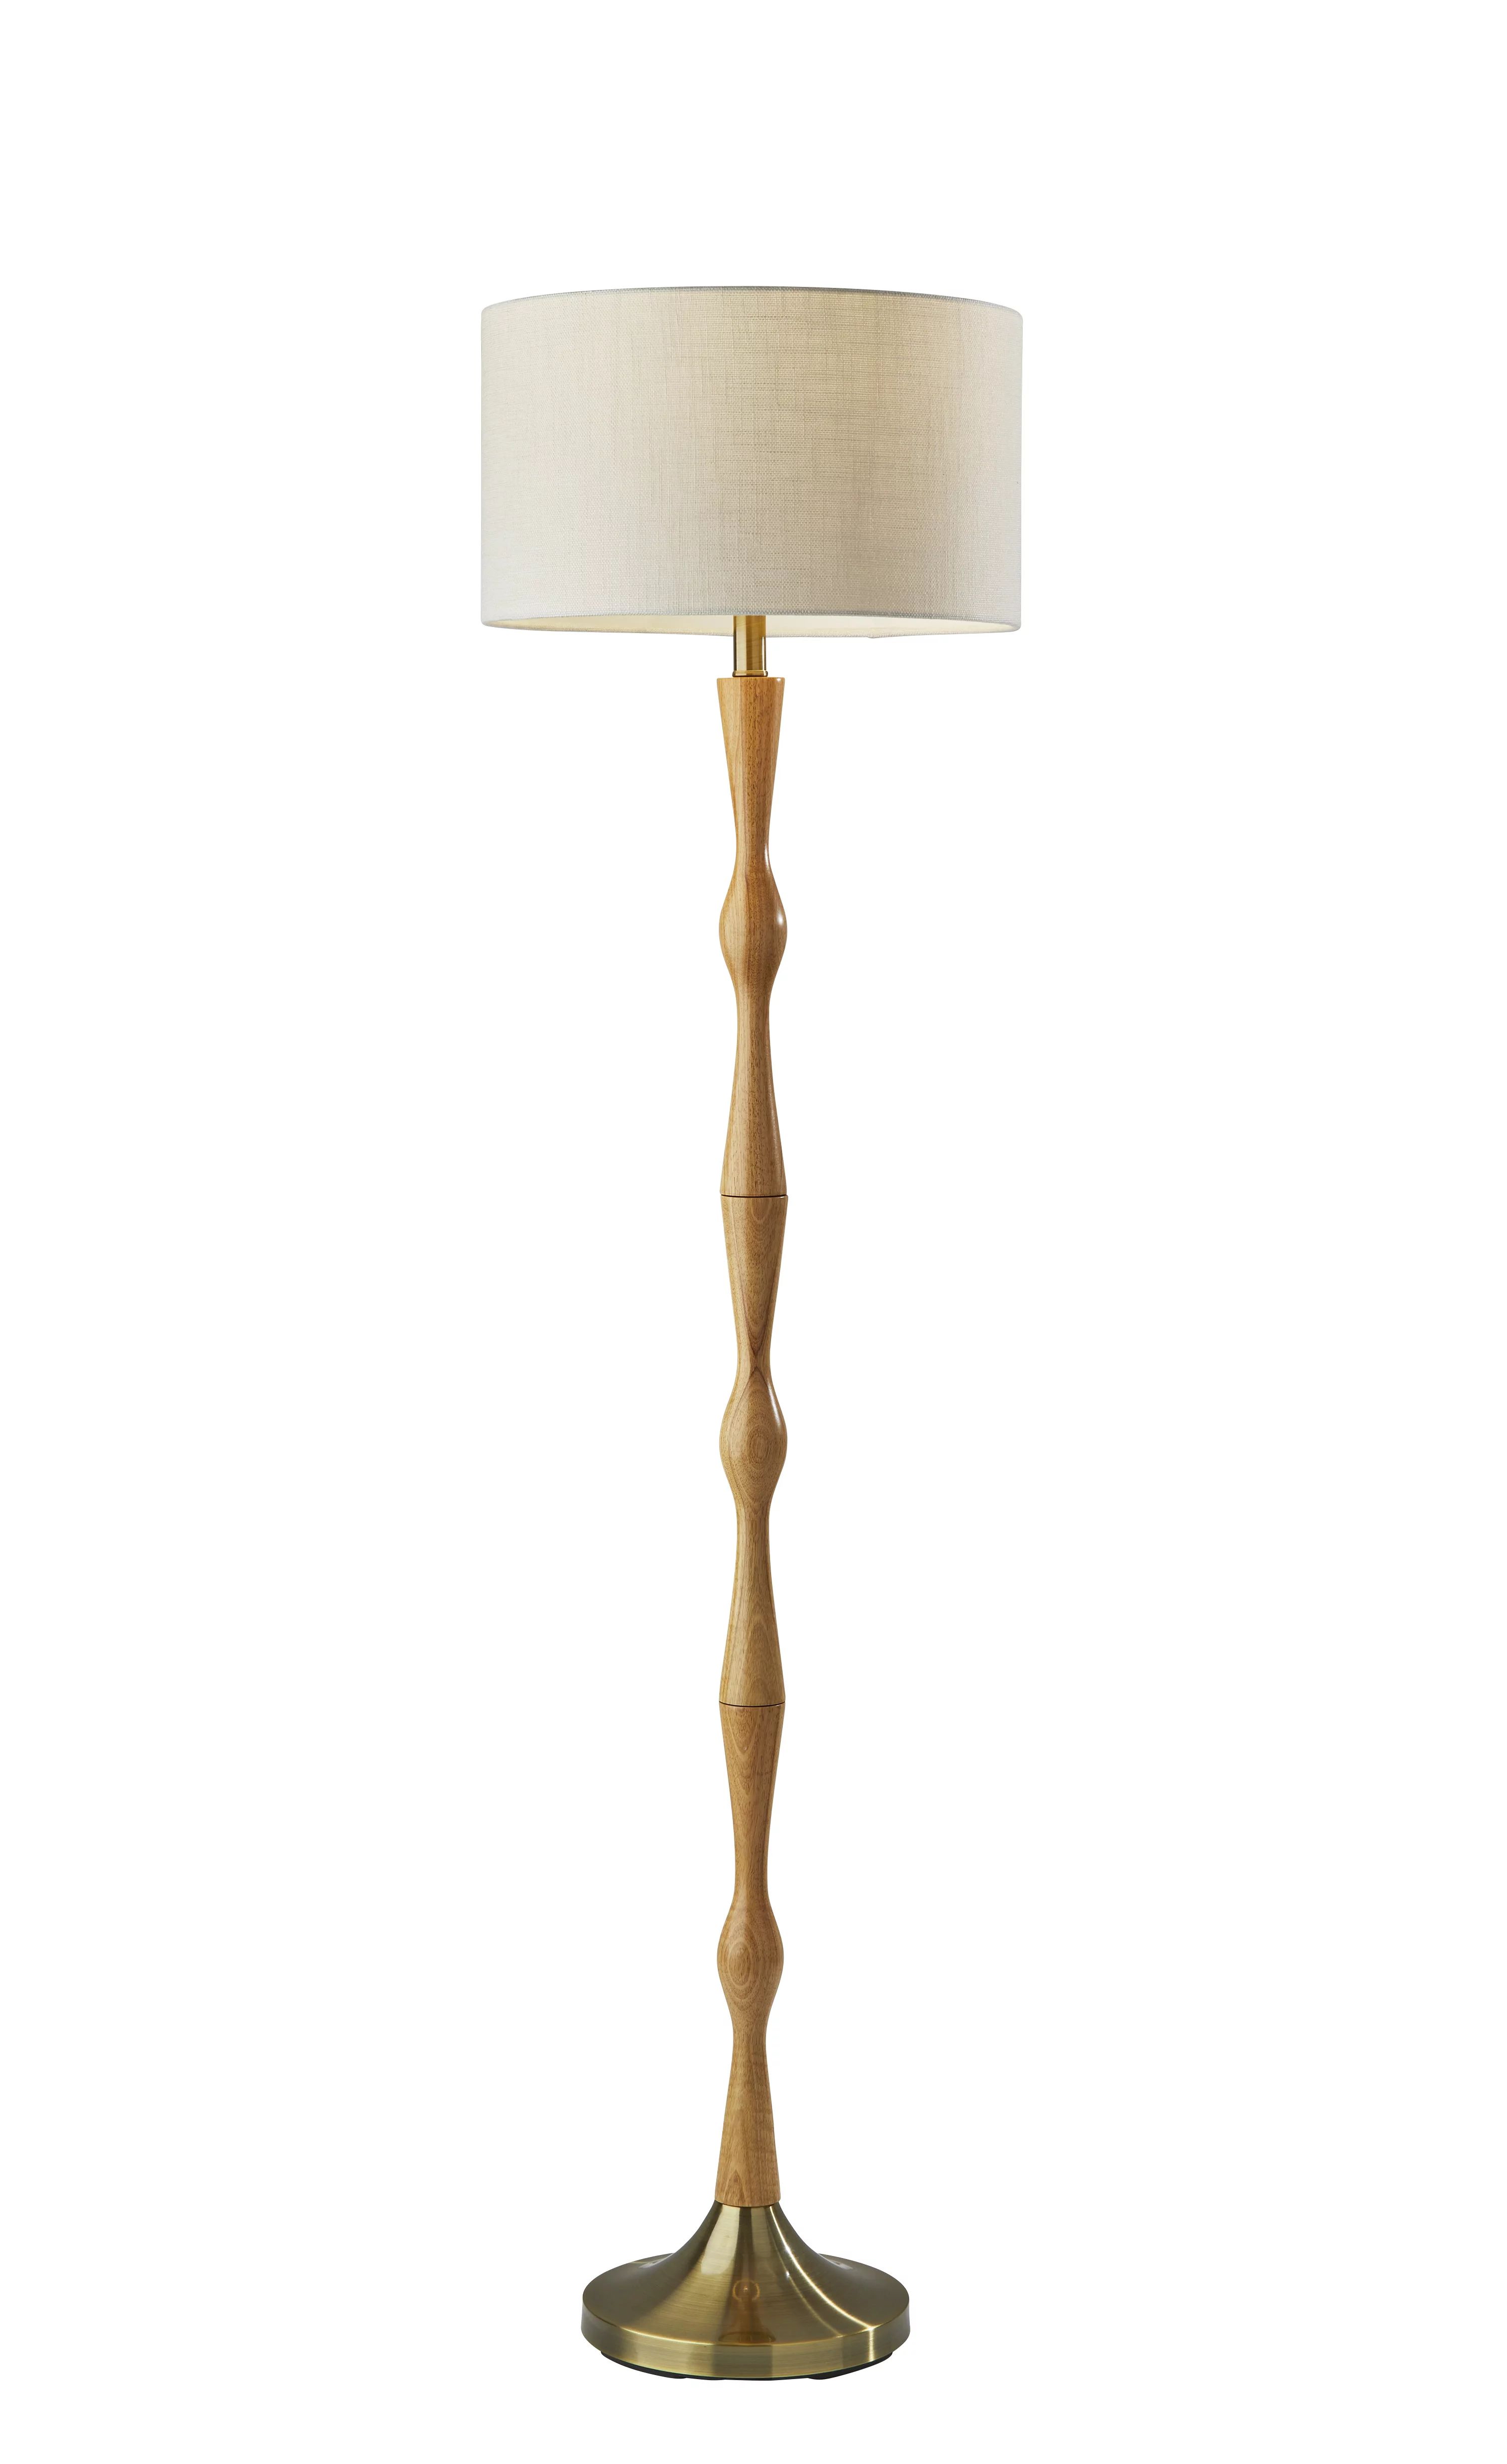 Eve Floor Lamp with Natural Oak Wood and Antique Brass Base | Walmart (US)